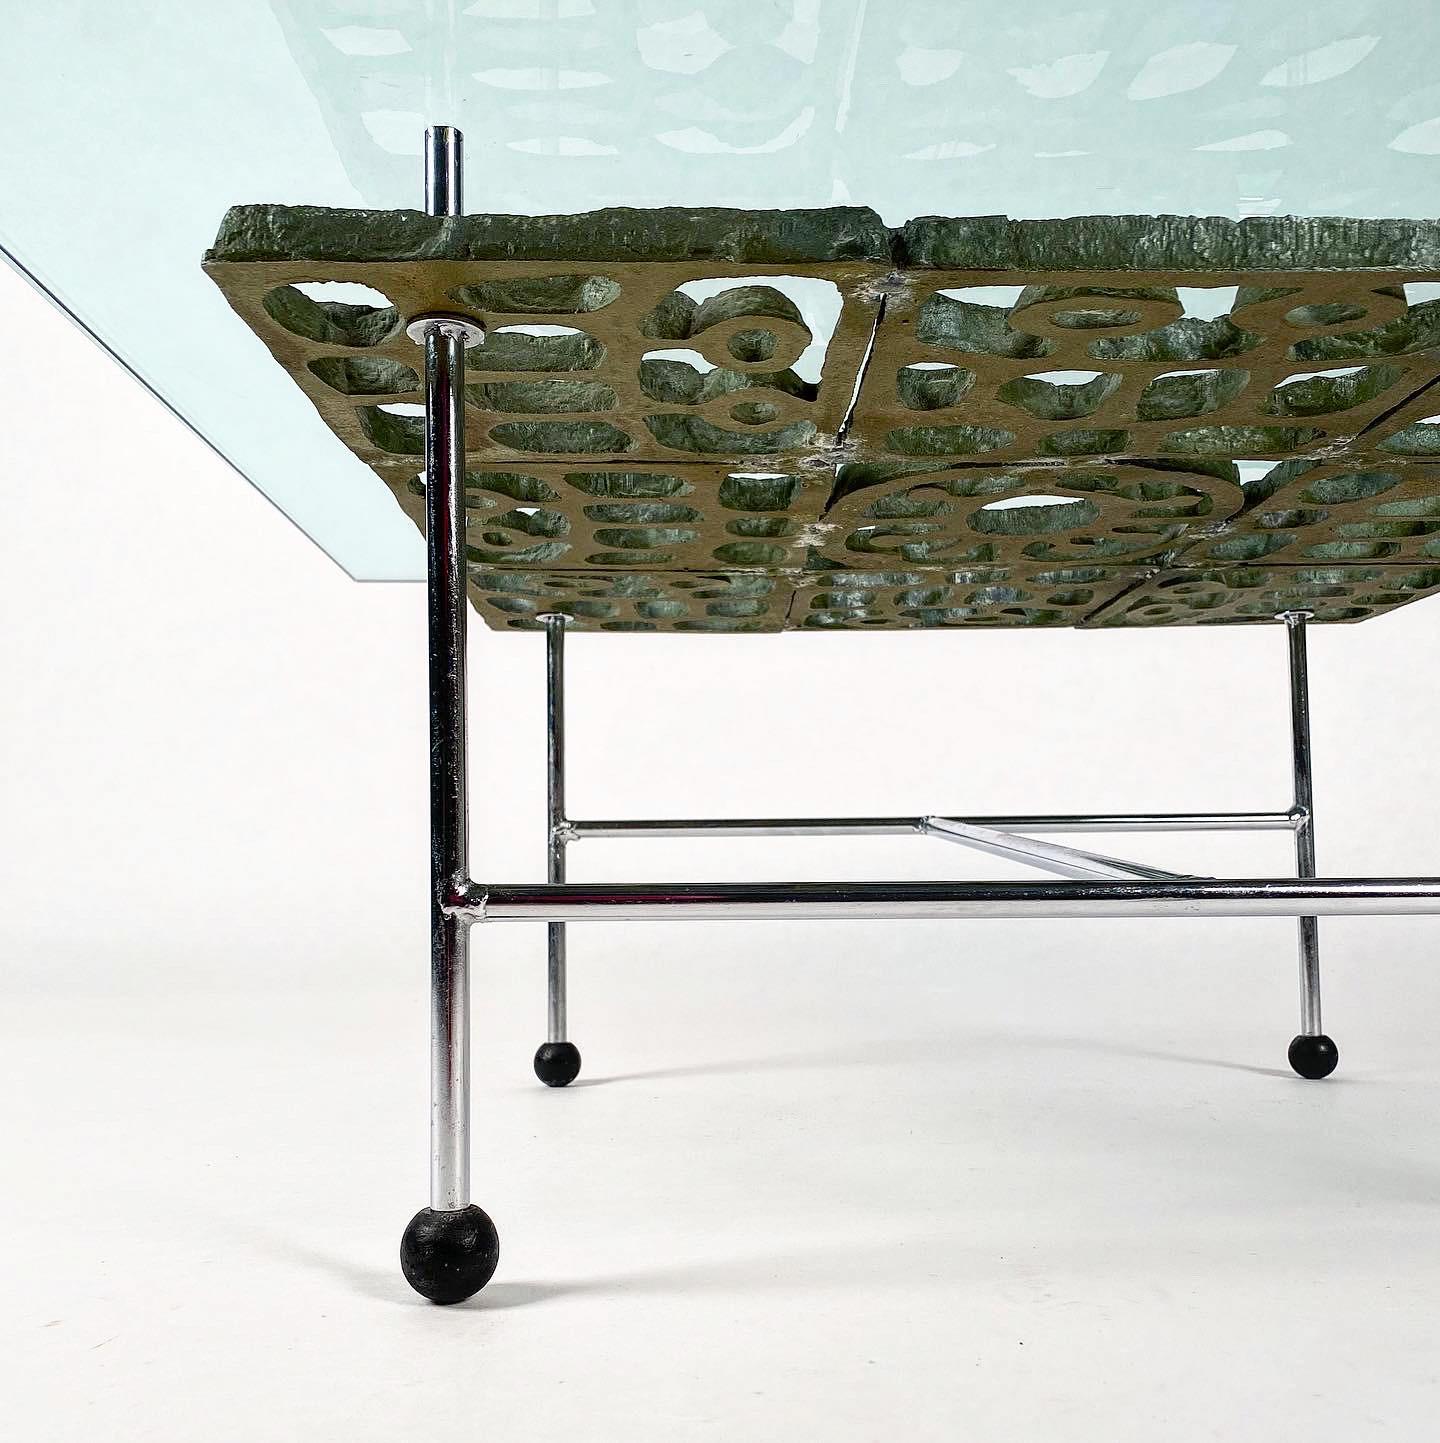 Fabulous one of a kind cocktail table by Don Drumm. The sculptural element is cast aluminum in a brutalist-style sun motif. Square glass top, (3/4” thickness) floats above the sculpture on a streamlined but sturdy steel frame. Black plastic ball